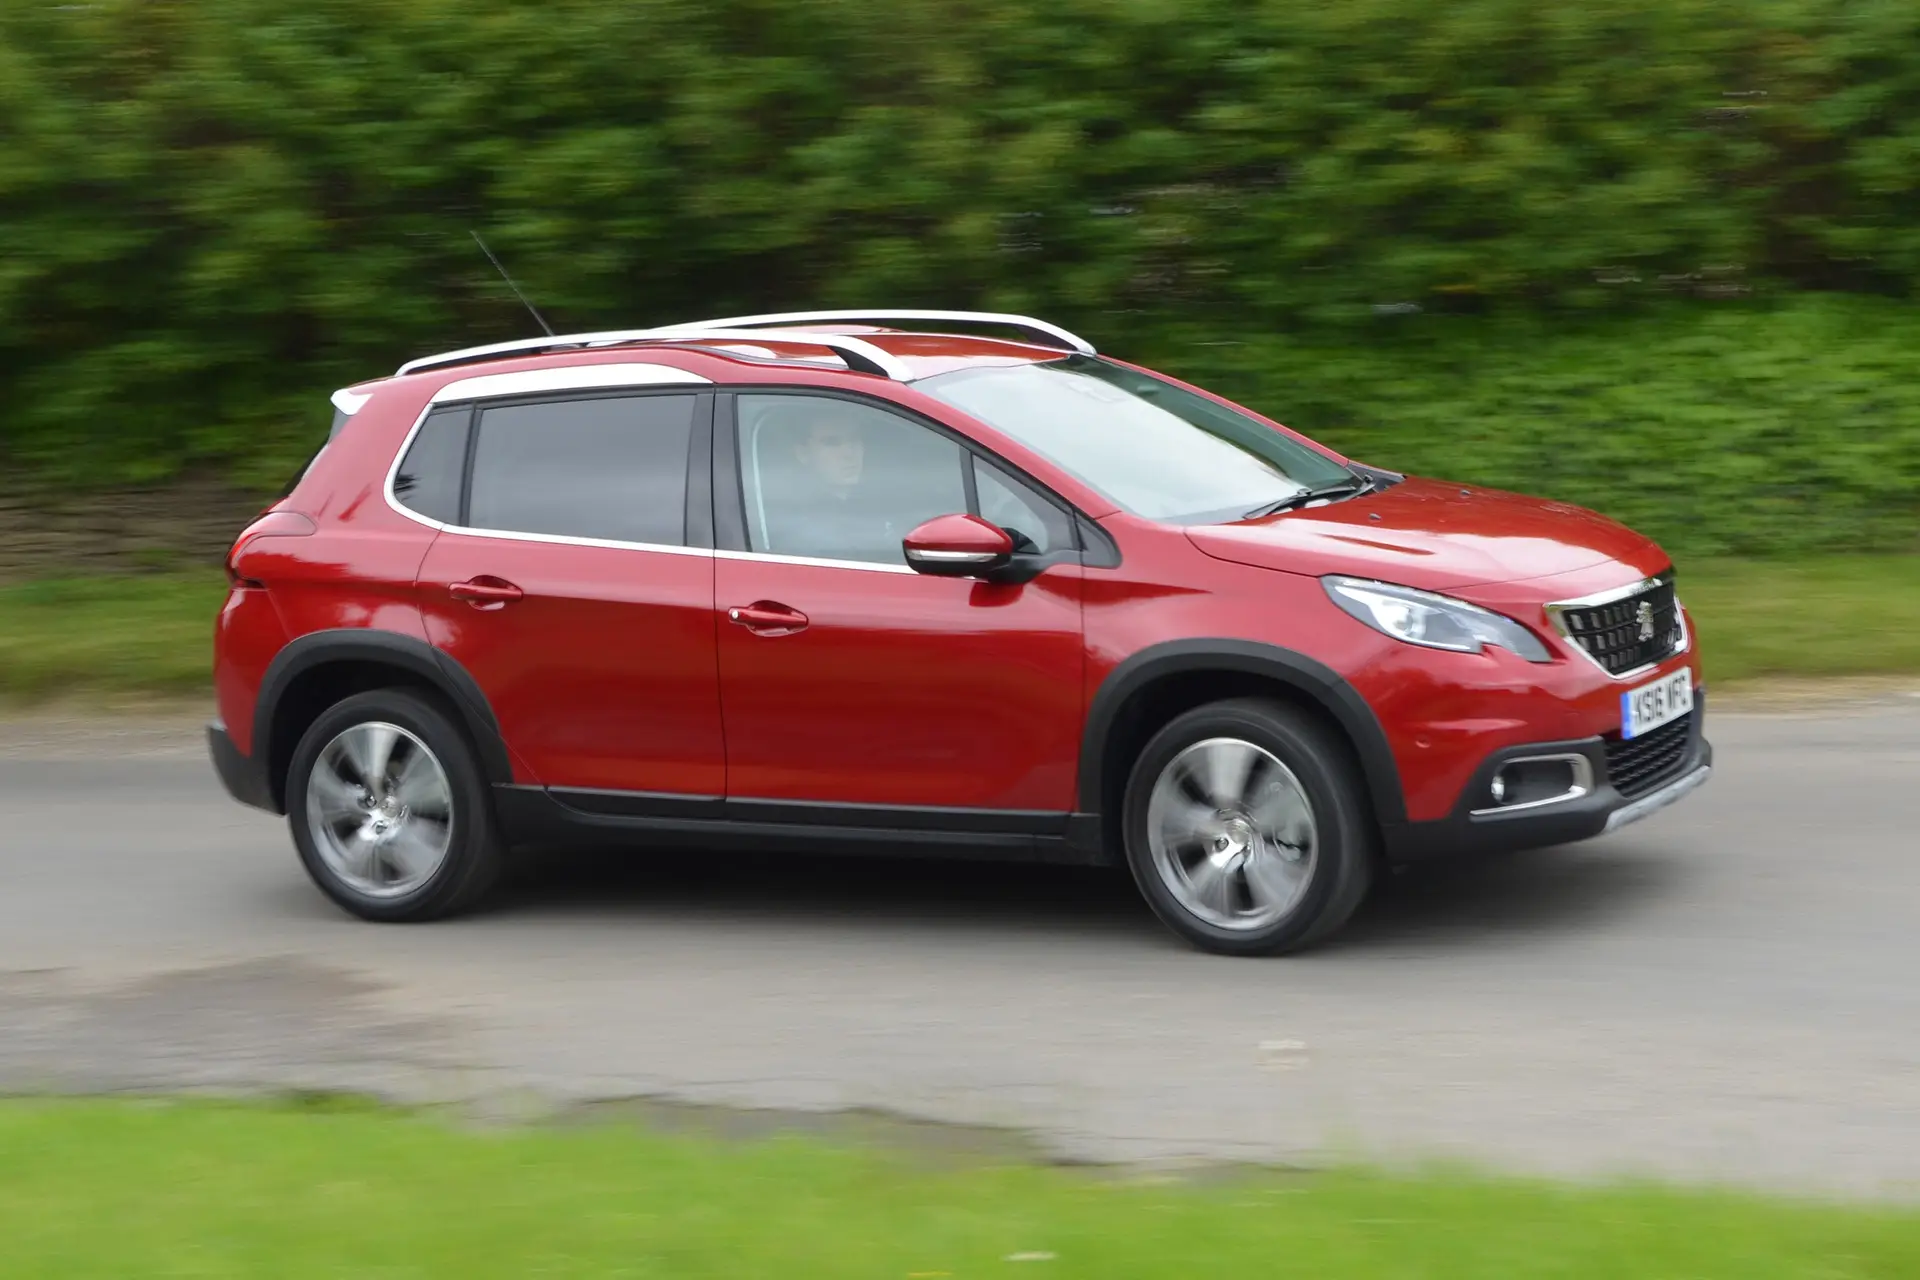 Peugeot 2008 (2013-2019) Review: exterior side photo of the Peugeot 2008 on the road